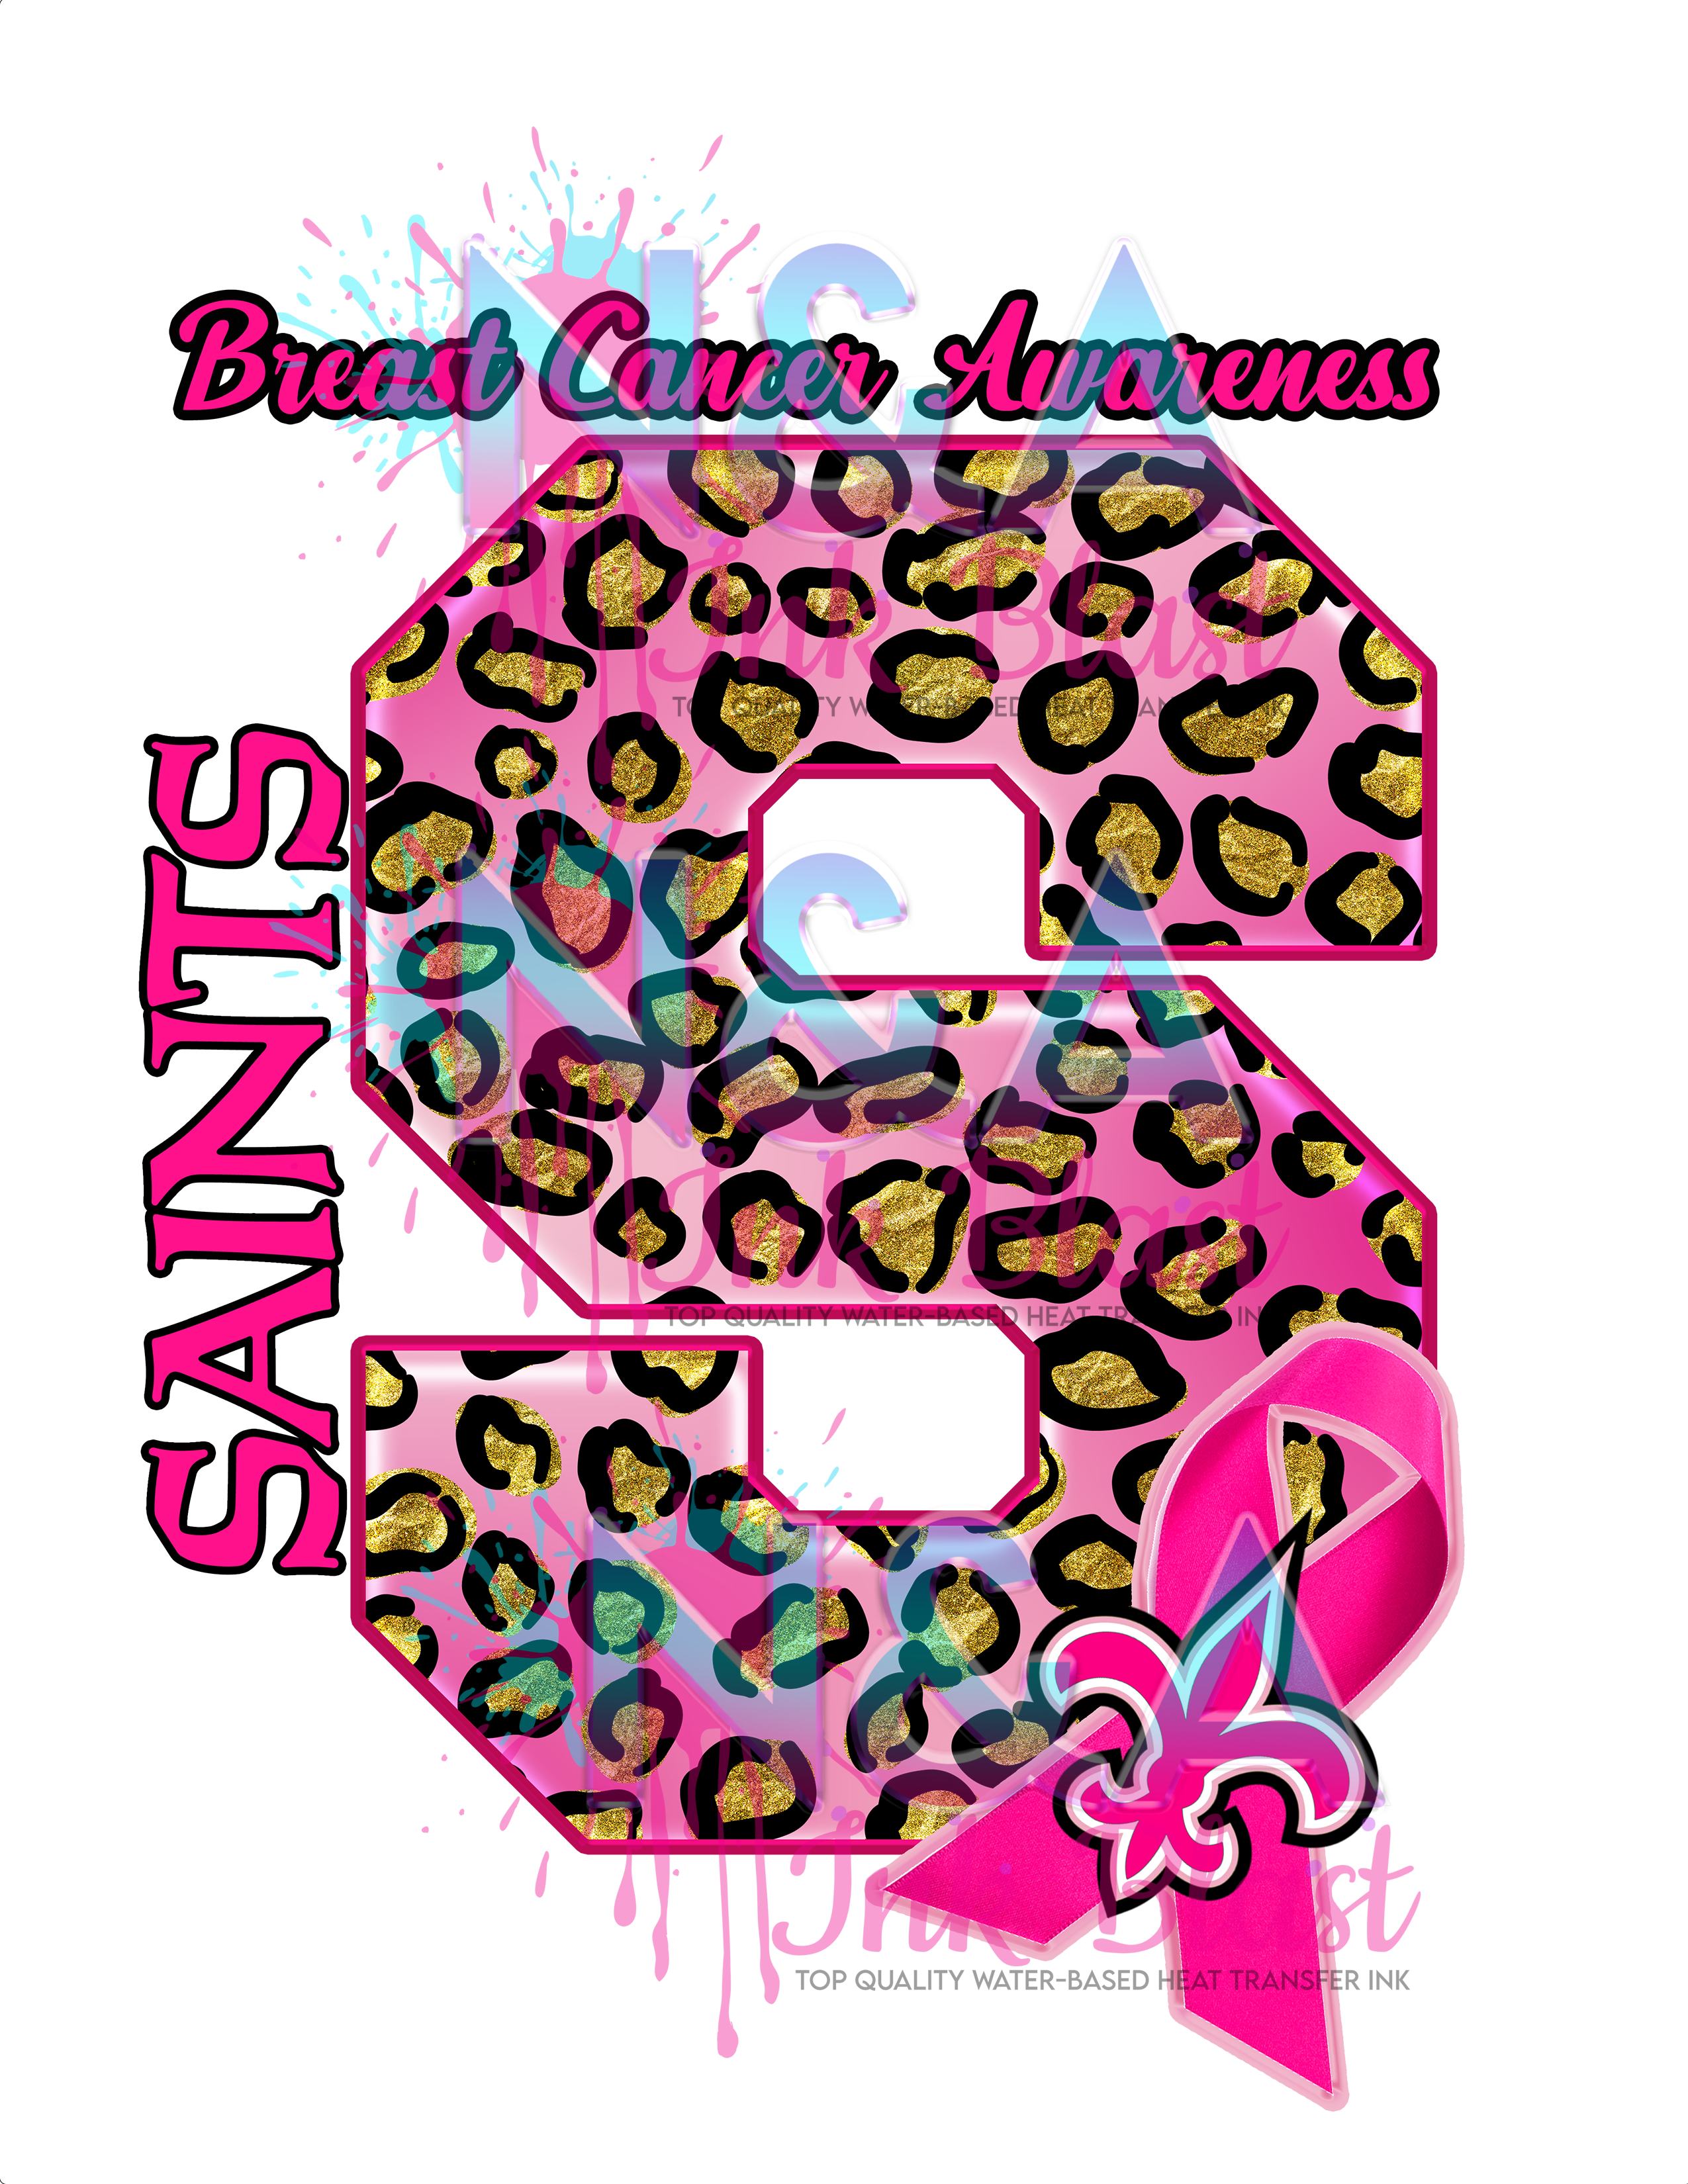 Breast Cancer Awareness Saints – Blanks by Amber